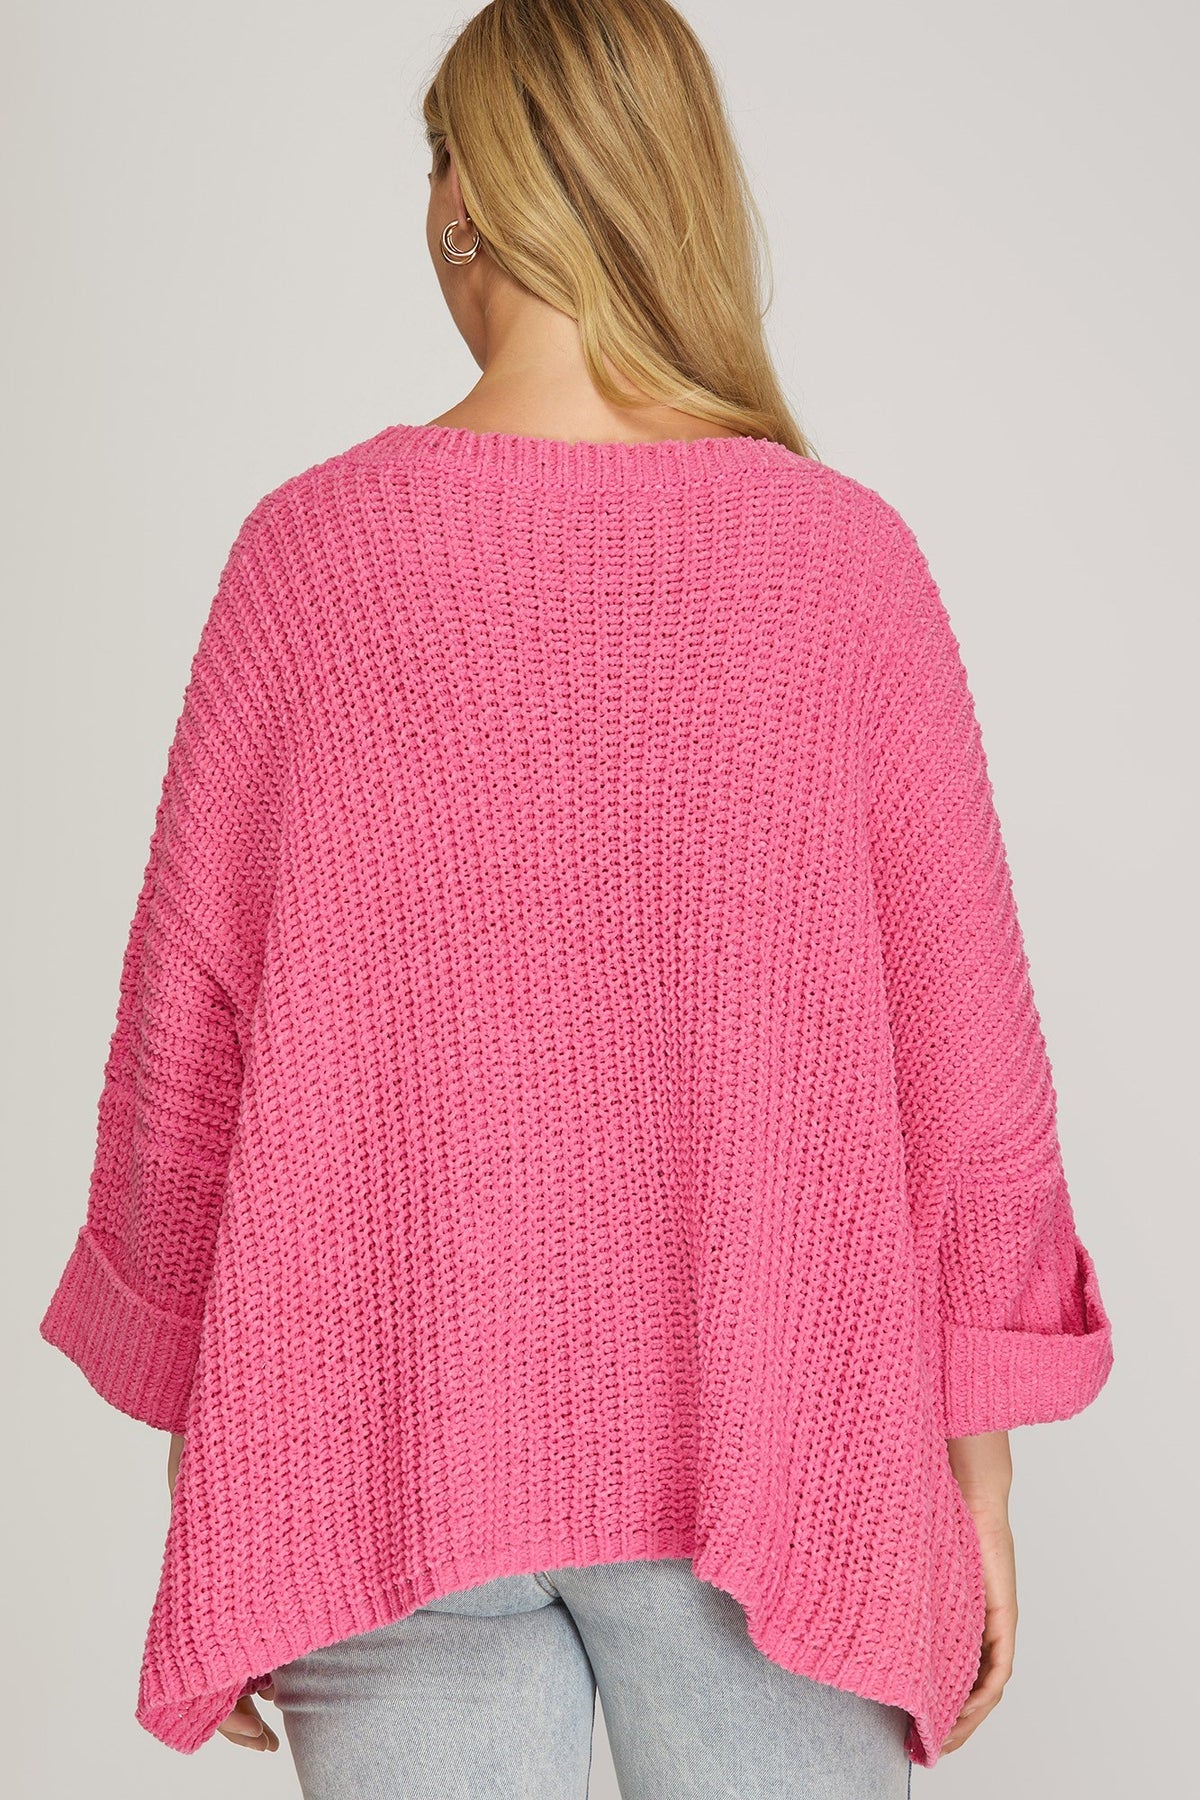 She + Sky | Chenille Oversized Sweater | Sweetest Stitch Boutique